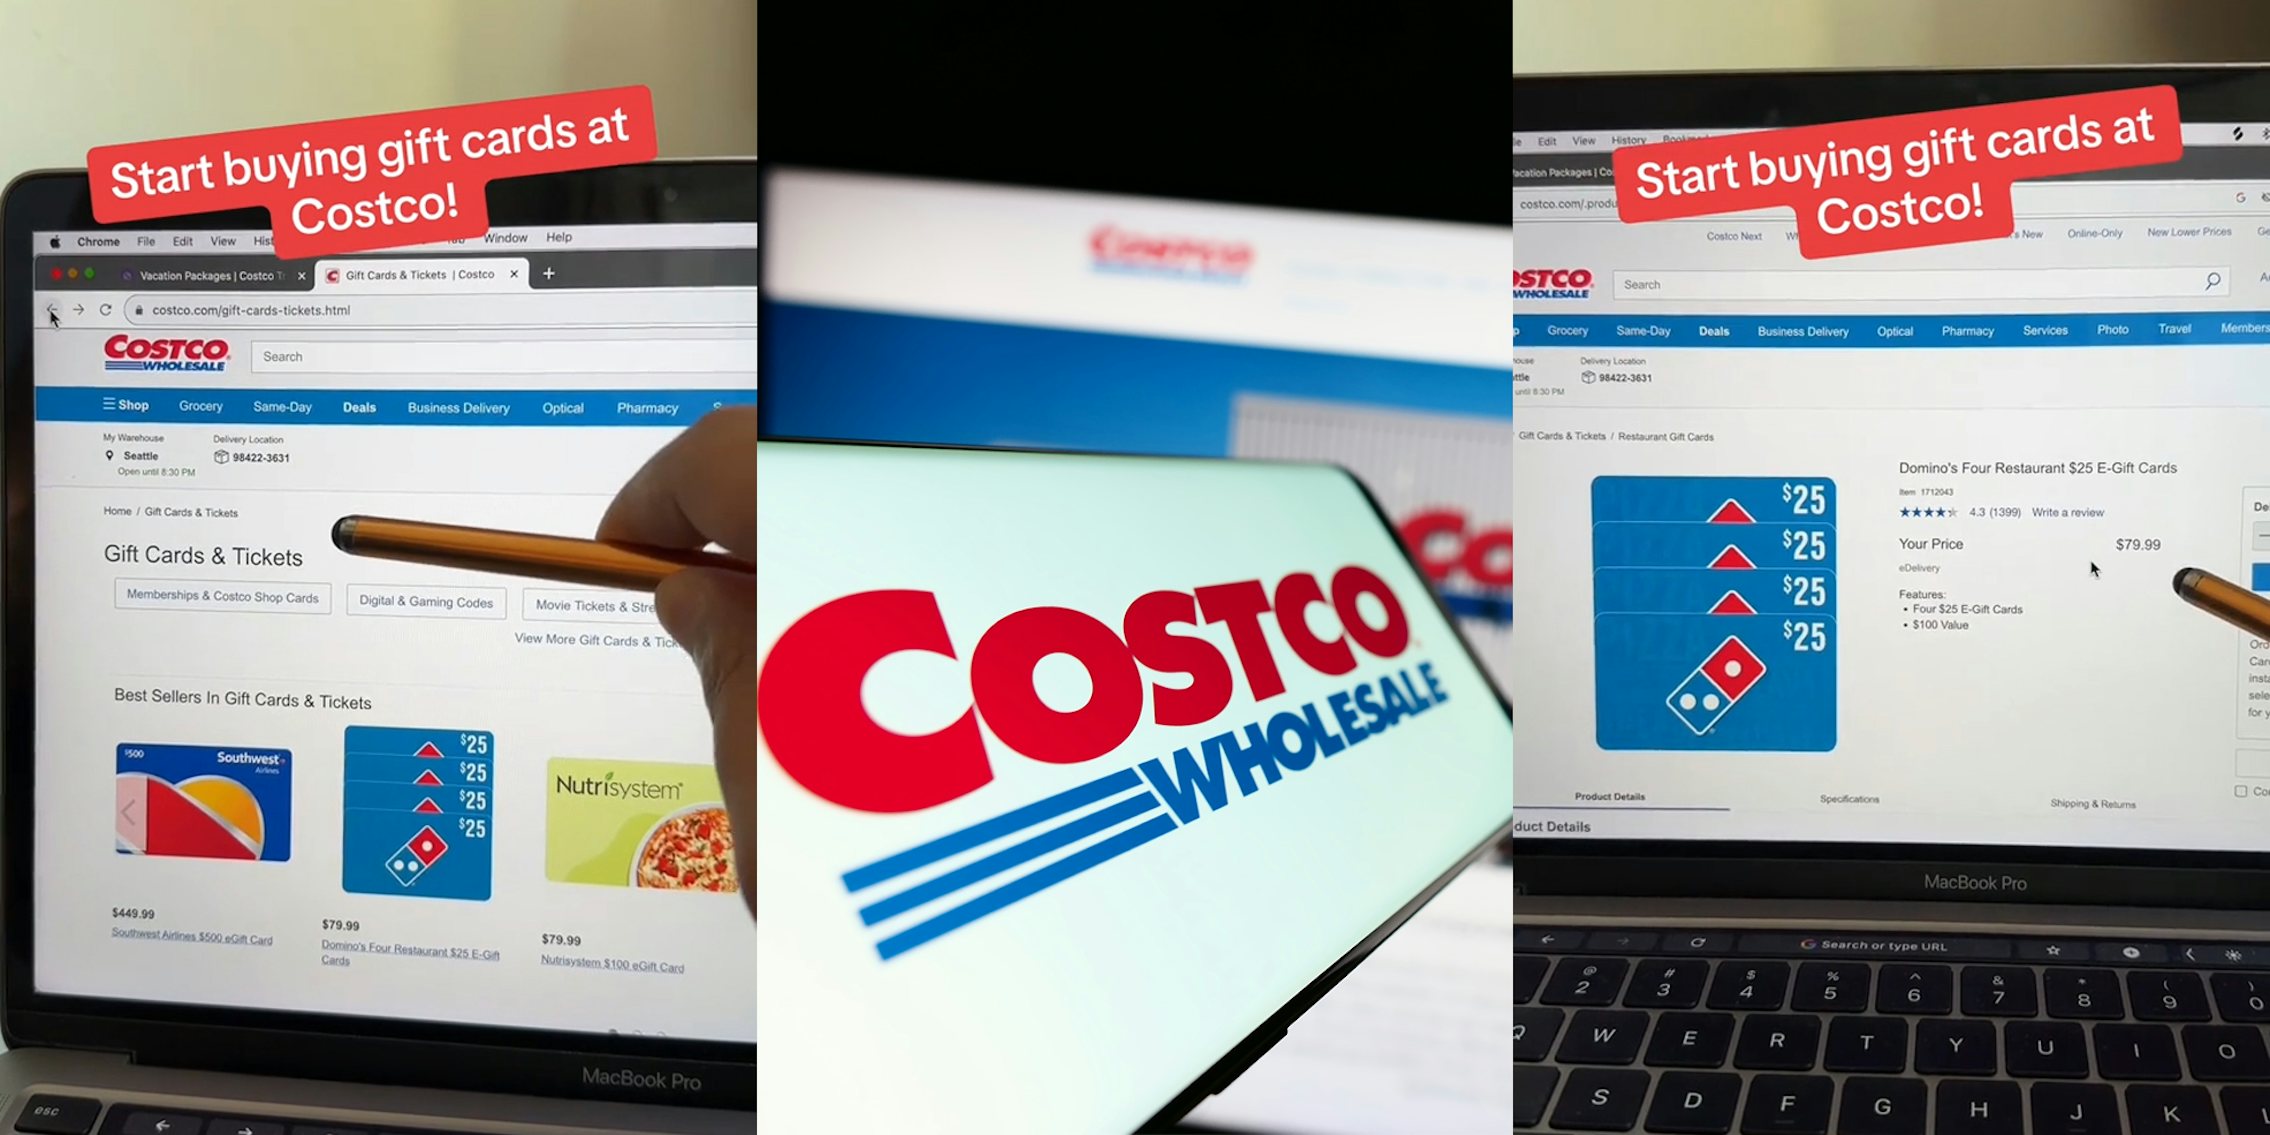 Costco website gift cards on laptop screen with caption 'Start buying gift cards at Costco!' (l) Costco on phone screen in front of laptop (c) Costco website gift cards on laptop screen with caption 'Start buying gift cards at Costco!' (r)